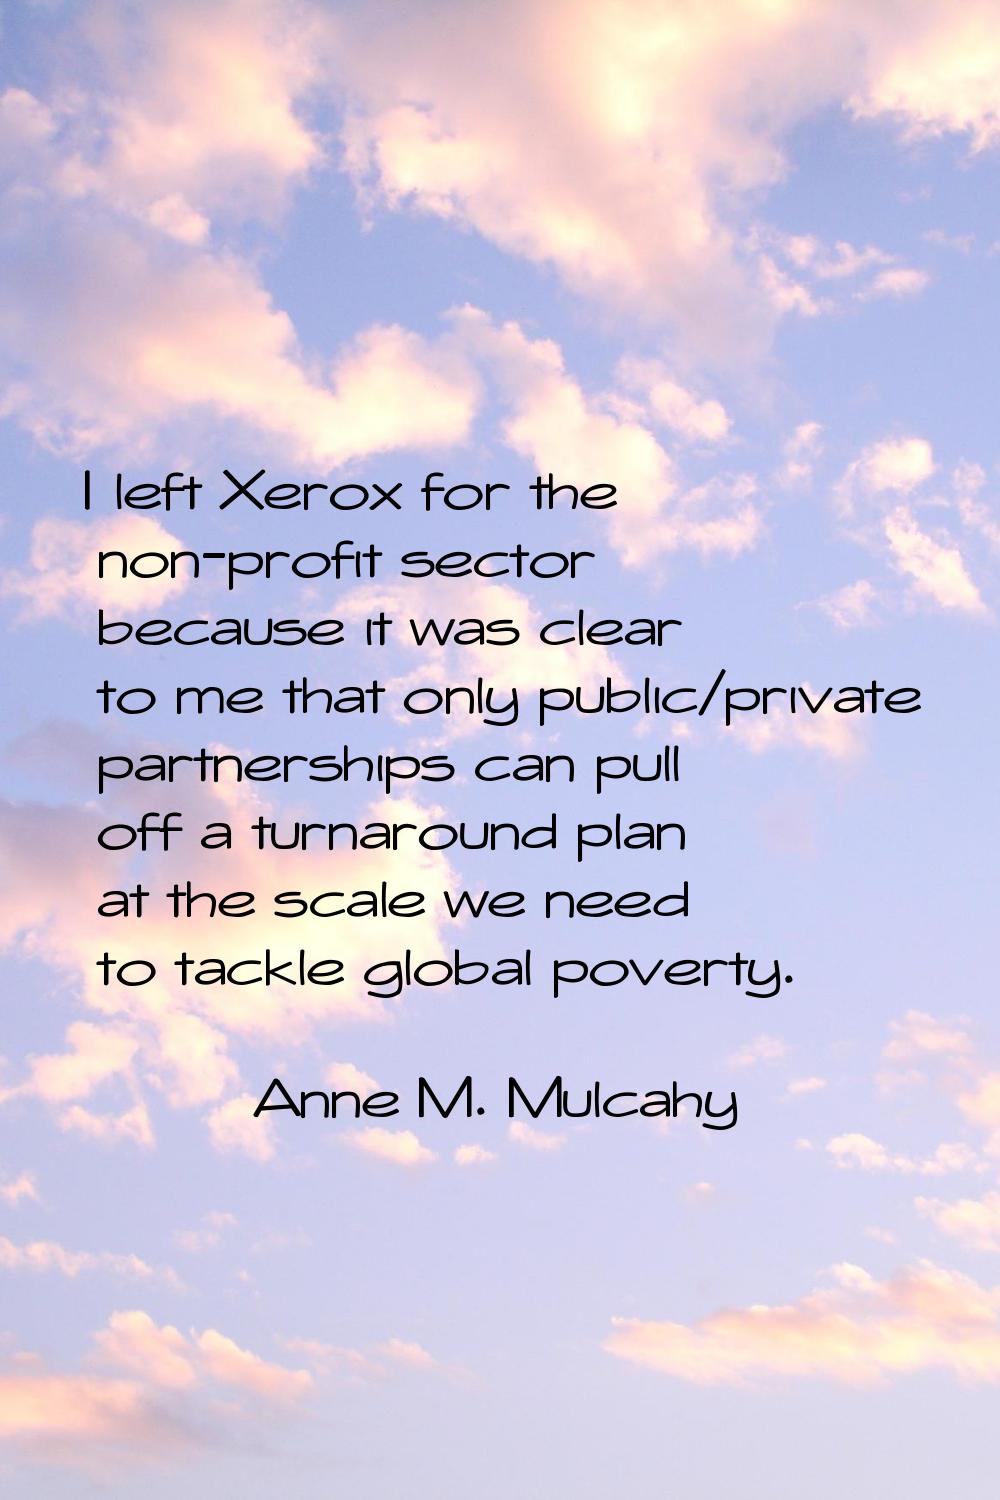 I left Xerox for the non-profit sector because it was clear to me that only public/private partners